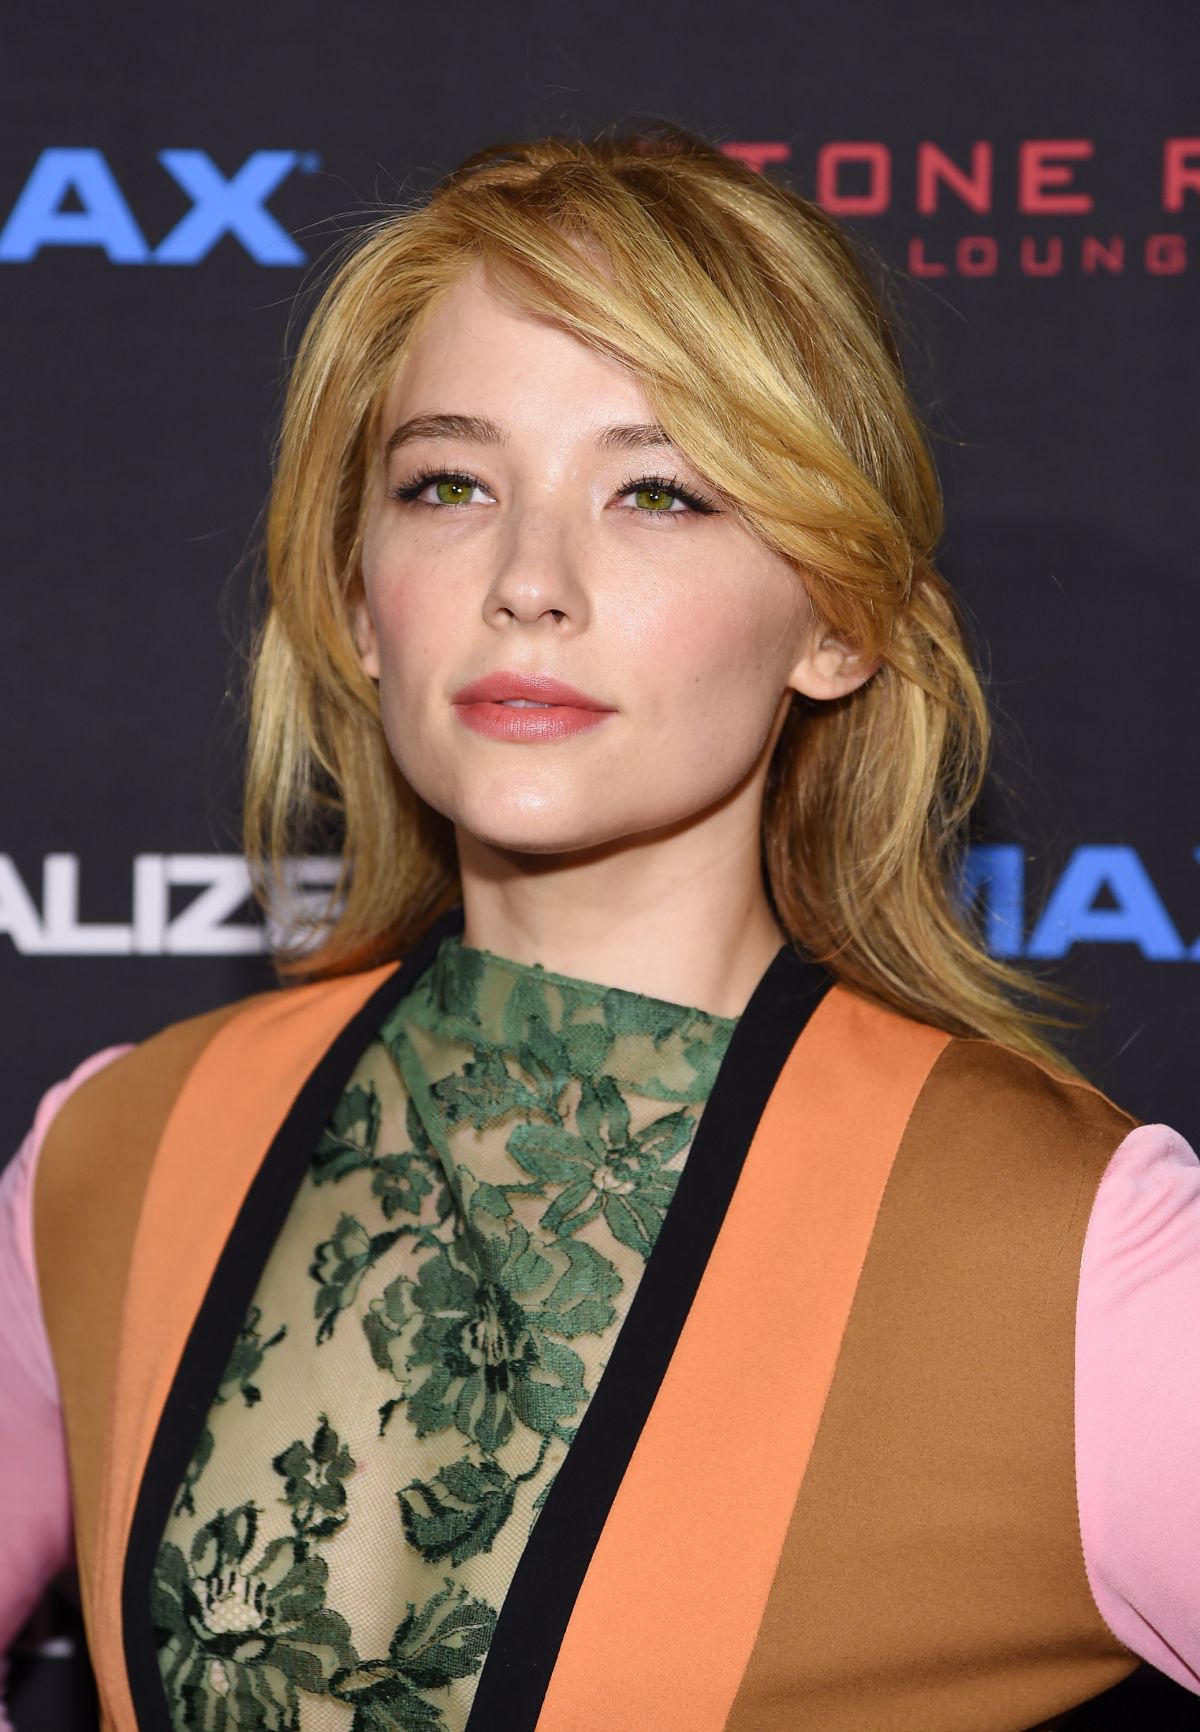 HALEY BENNETT at The Equalizer Premiere in new York – HawtCelebs